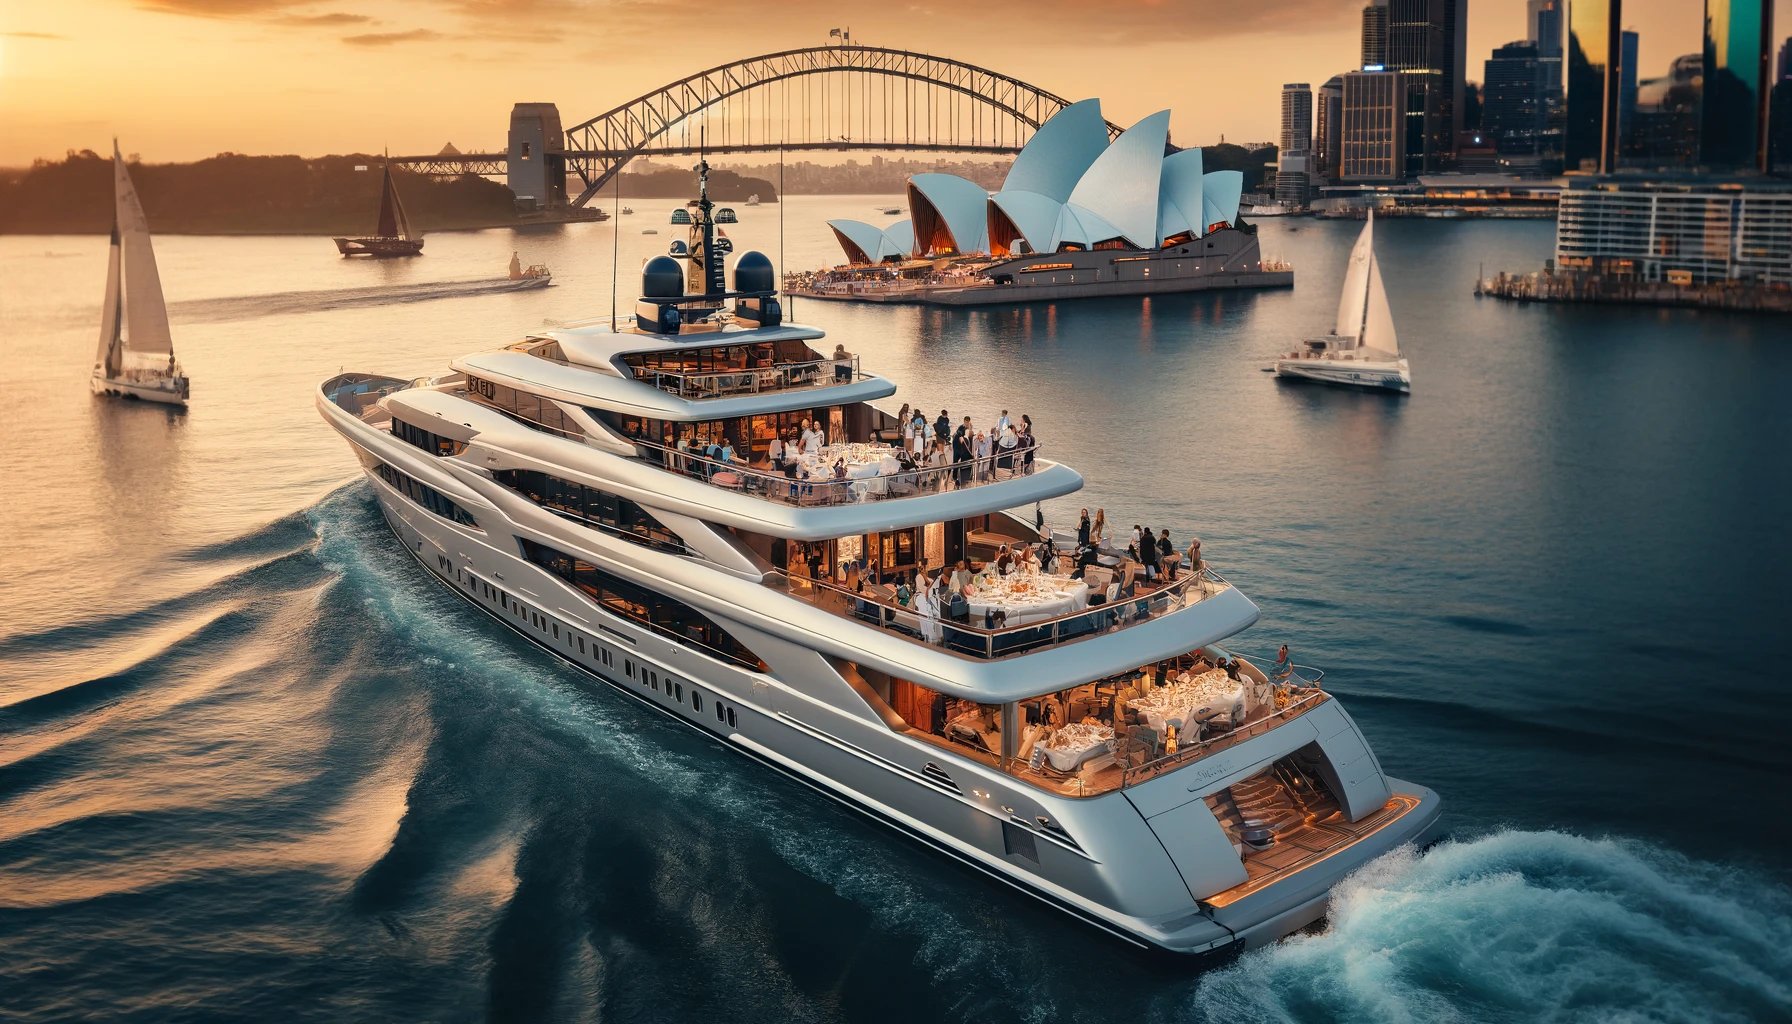  A luxurious yacht cruising on the scenic waters of Sydney Harbour during sunset. The yacht is elegantly designed with multiple decks, spacious living areas, and guests enjoying their time on board. In the background, the iconic Sydney Opera House and Harbour Bridge are visible, adding to the stunning backdrop. The atmosphere is lively yet sophisticated, with people dining, dancing, and taking in the breathtaking views.